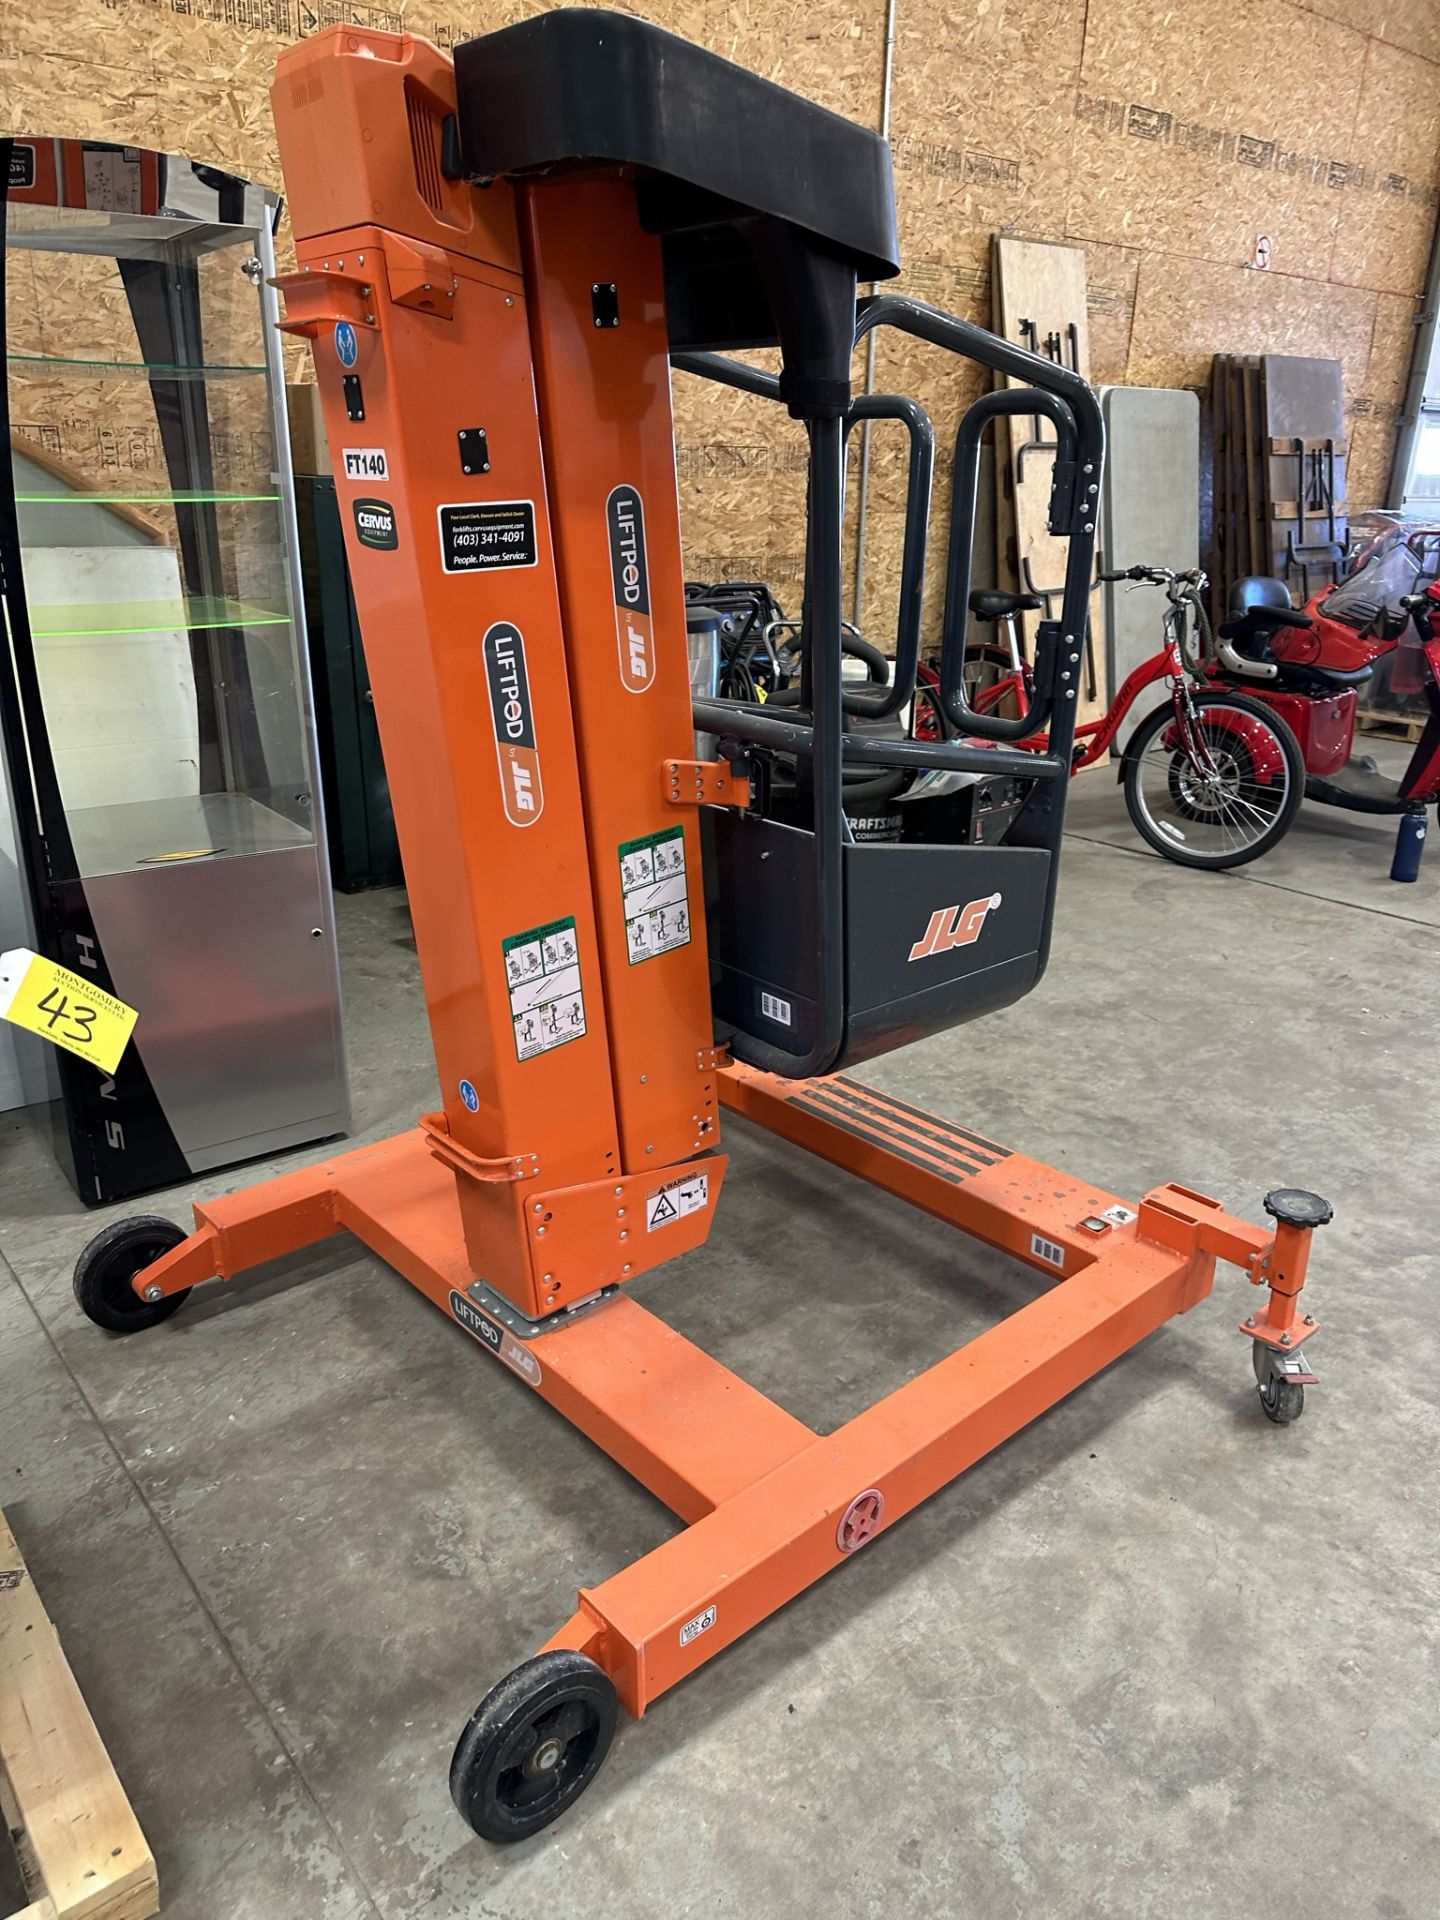 JLG LIFTPOD FT140 MAN LIFT 13.5FT PLATFORM HEIGHT, 40V W/ CHARGER, BATTERY, TOTAL WEIGHT 325 LBS